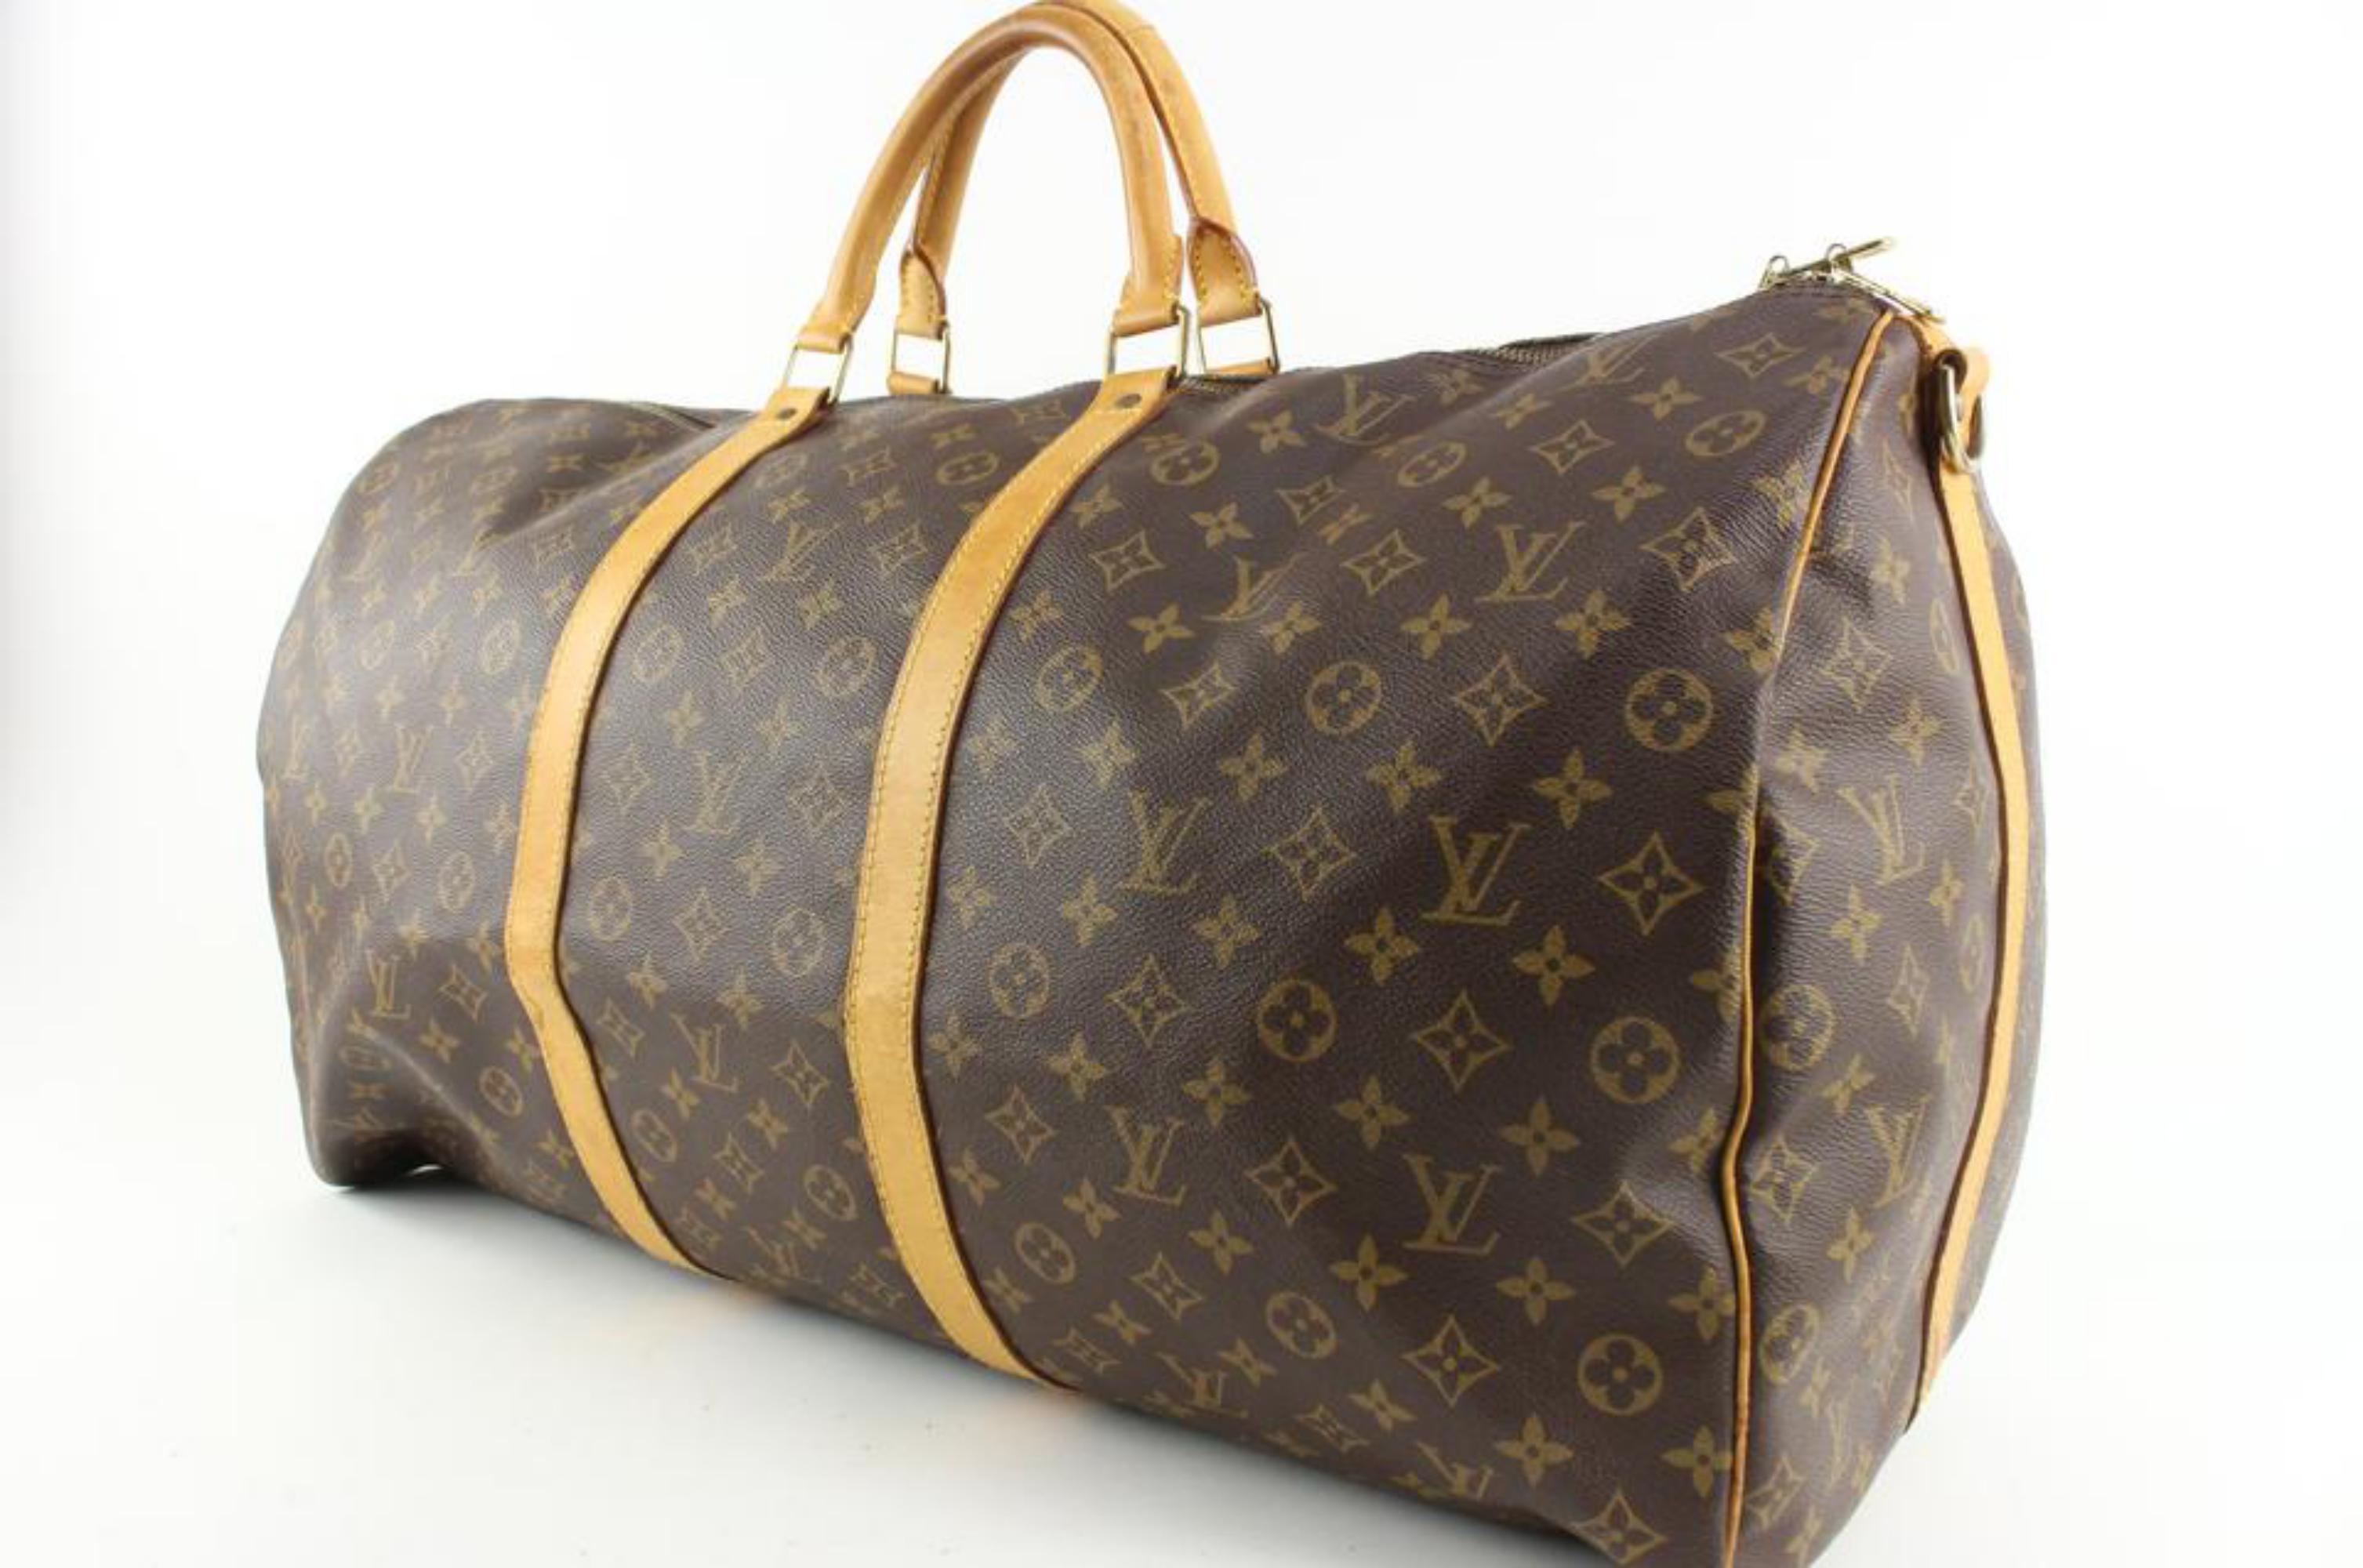 Louis Vuitton Monogram Keepall 60 Duffle Bag 1222lv23
Date Code/Serial Number: TH0947
Made In: France
Measurements: Length:  23.5